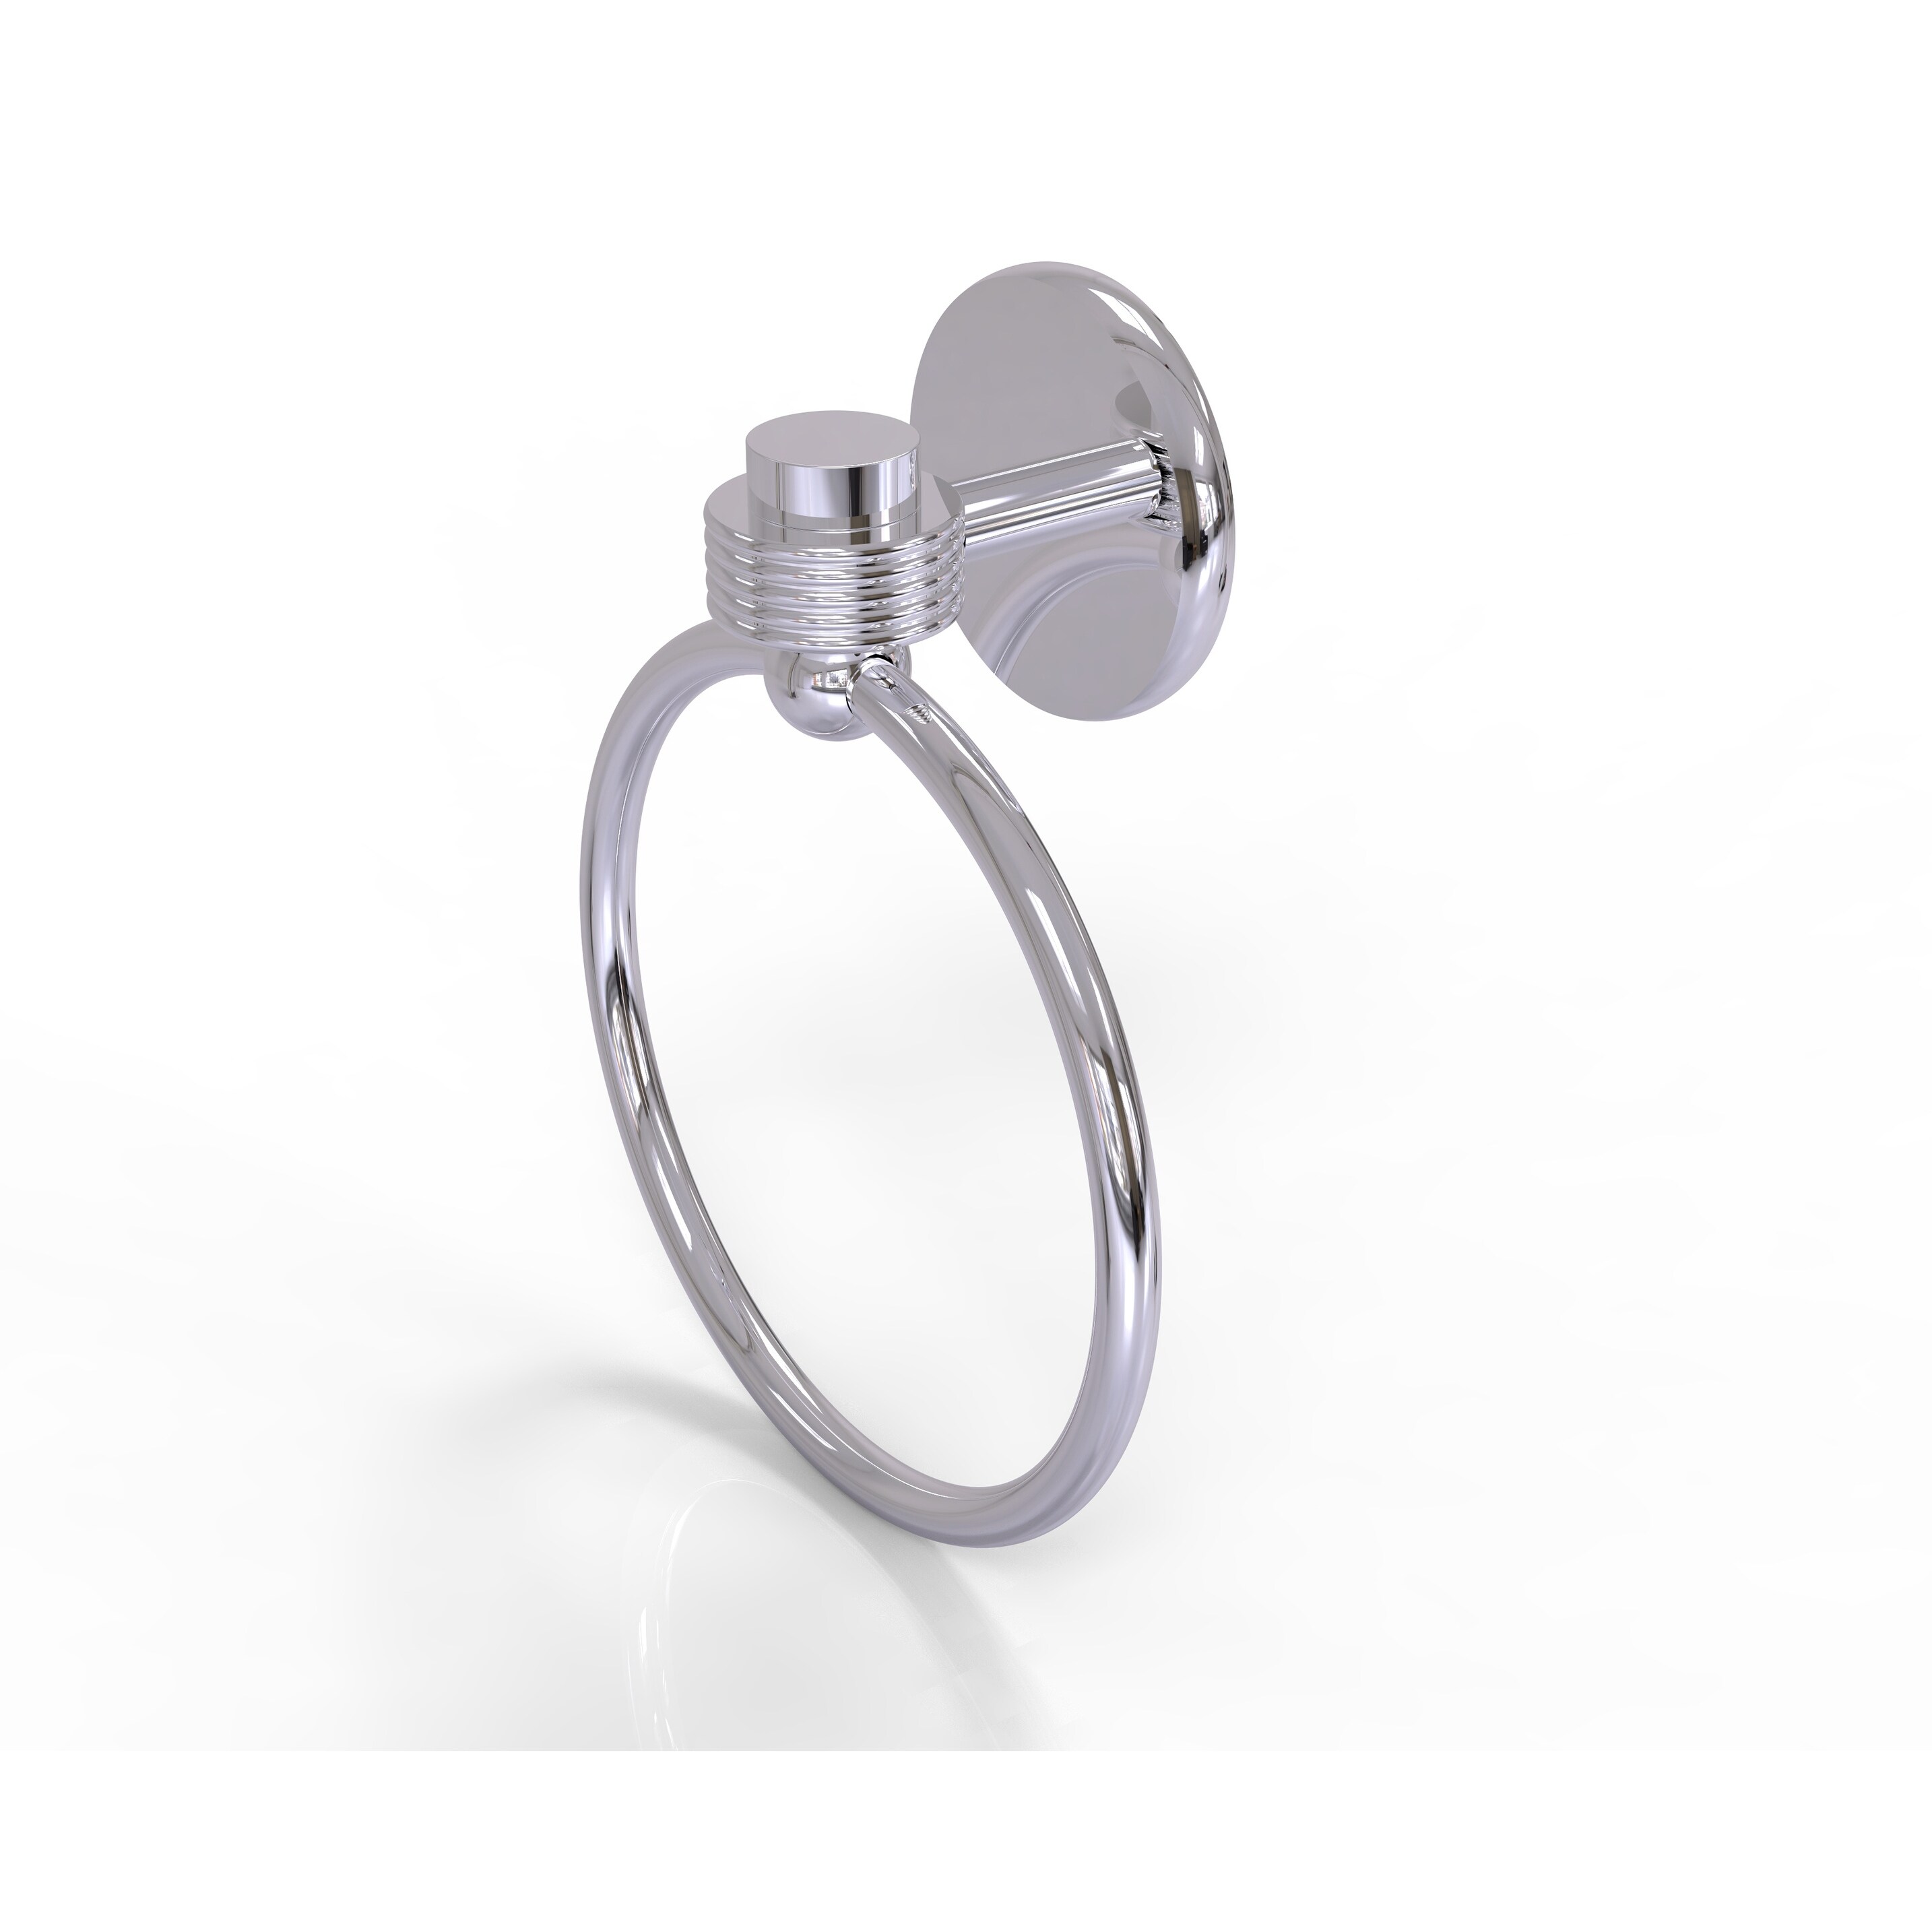 Allied Brass Satellite Orbit One Collection Towel Ring with Groovy Accent